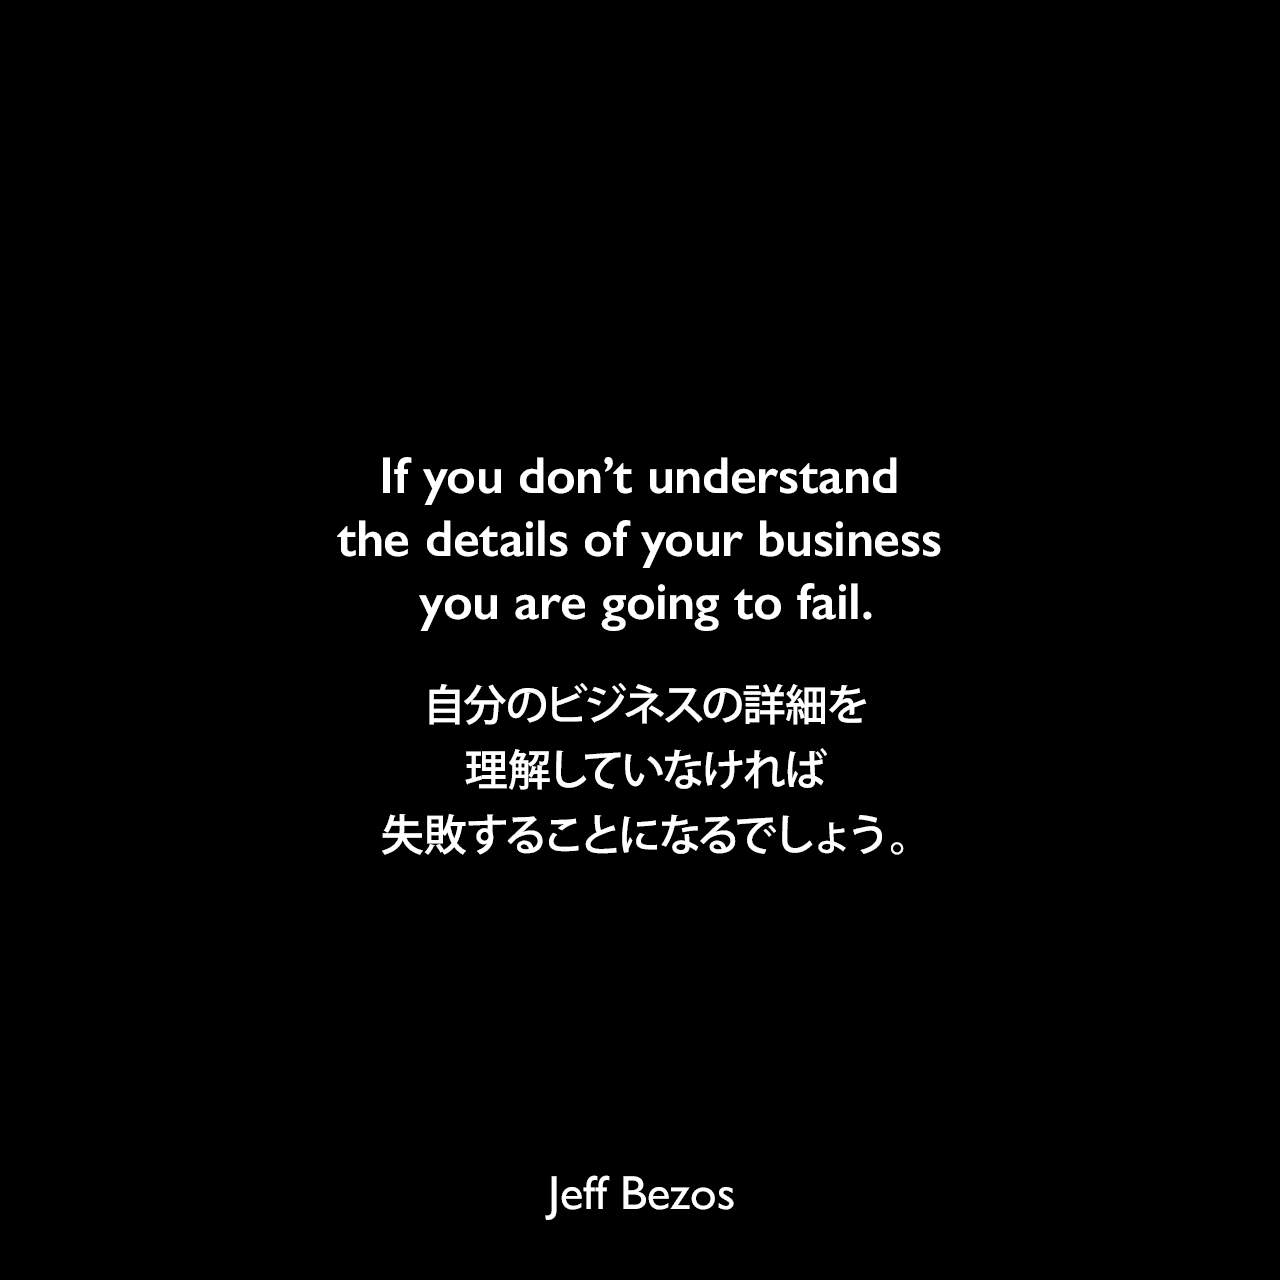 If you don’t understand the details of your business you are going to fail.自分のビジネスの詳細を理解していなければ、失敗することになるでしょう。Jeff Bezos